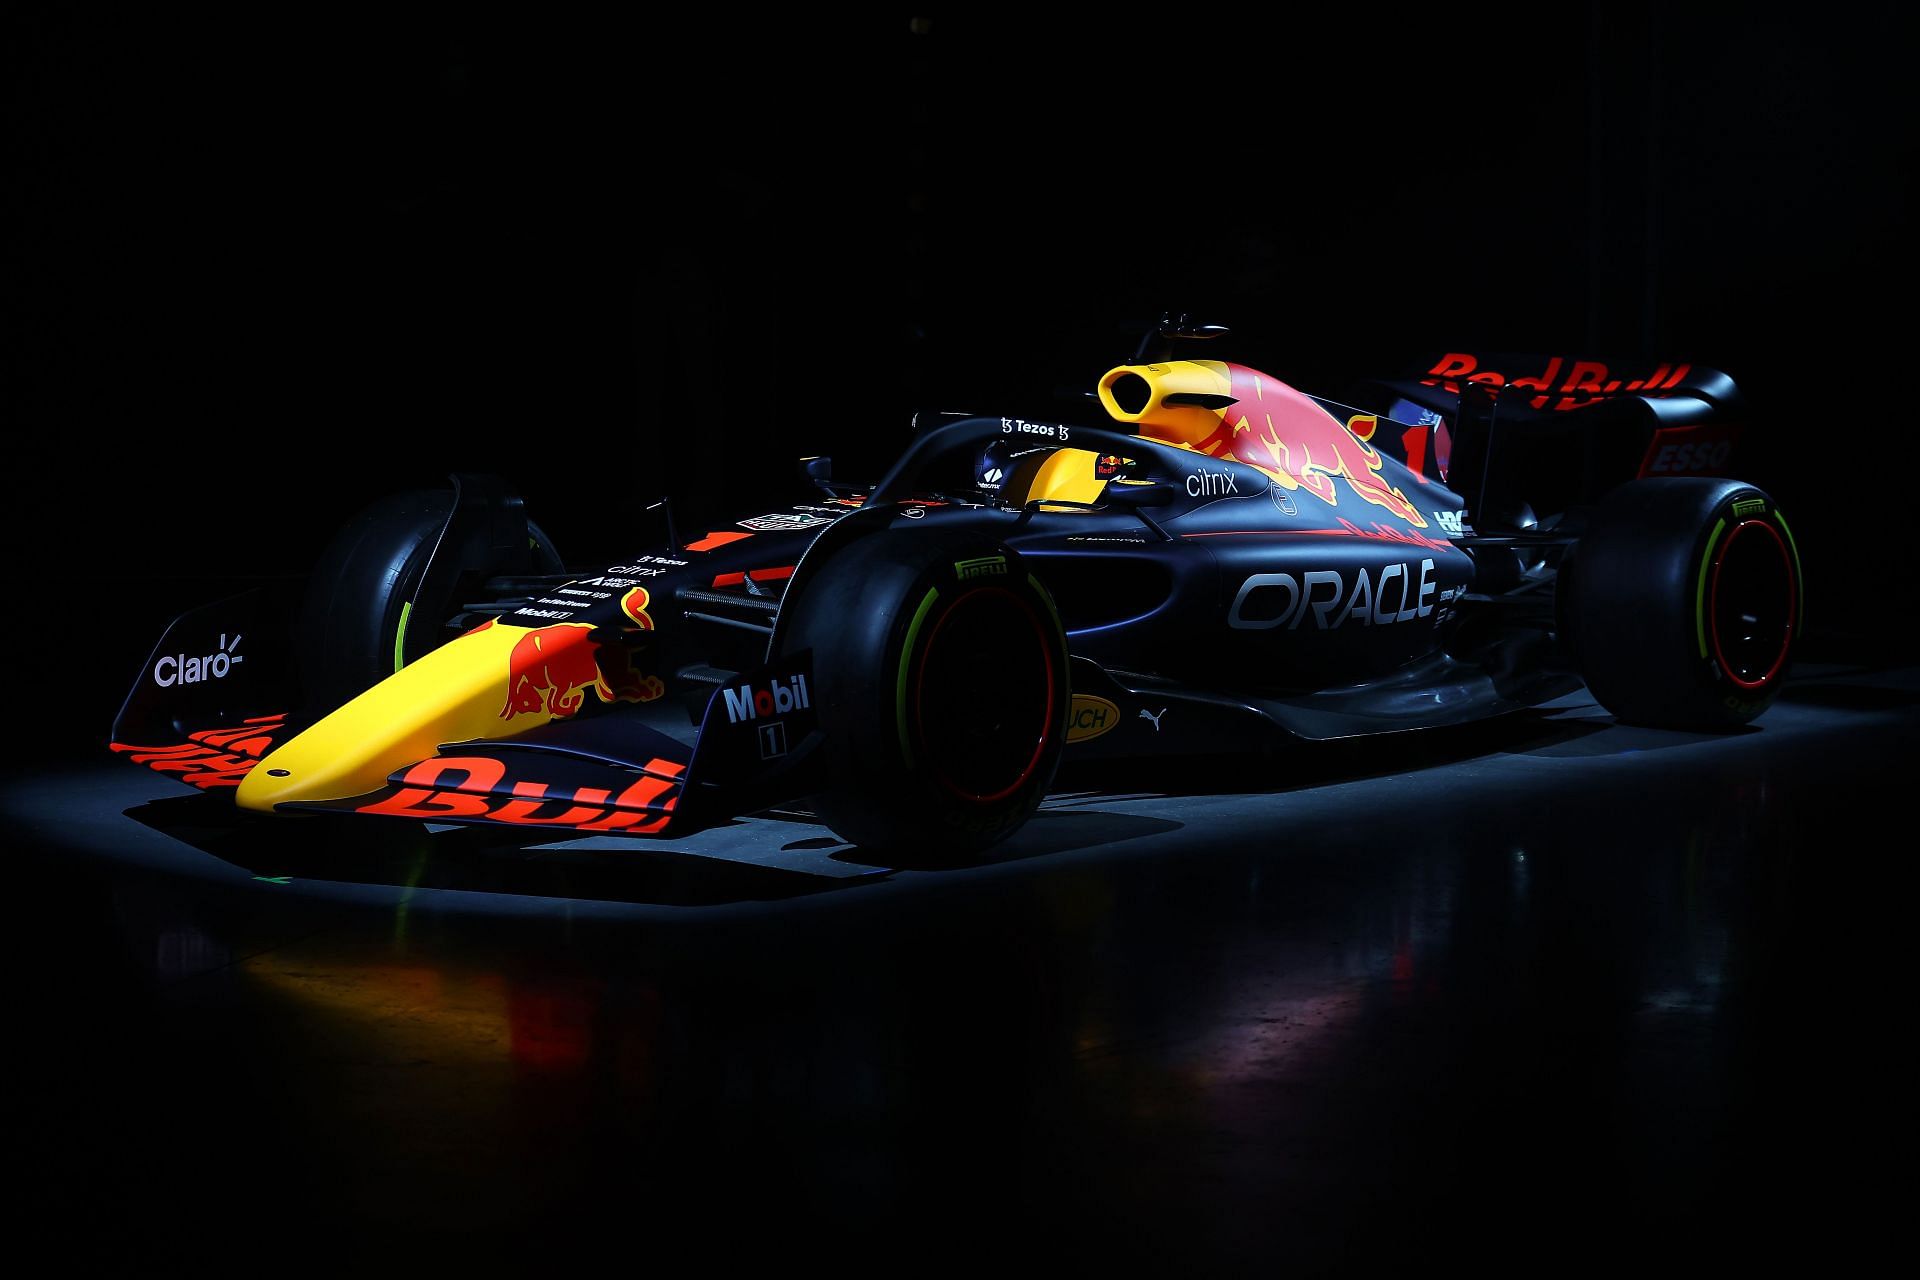 Red Bull was one of the first teams to unveil their 2022 challenger